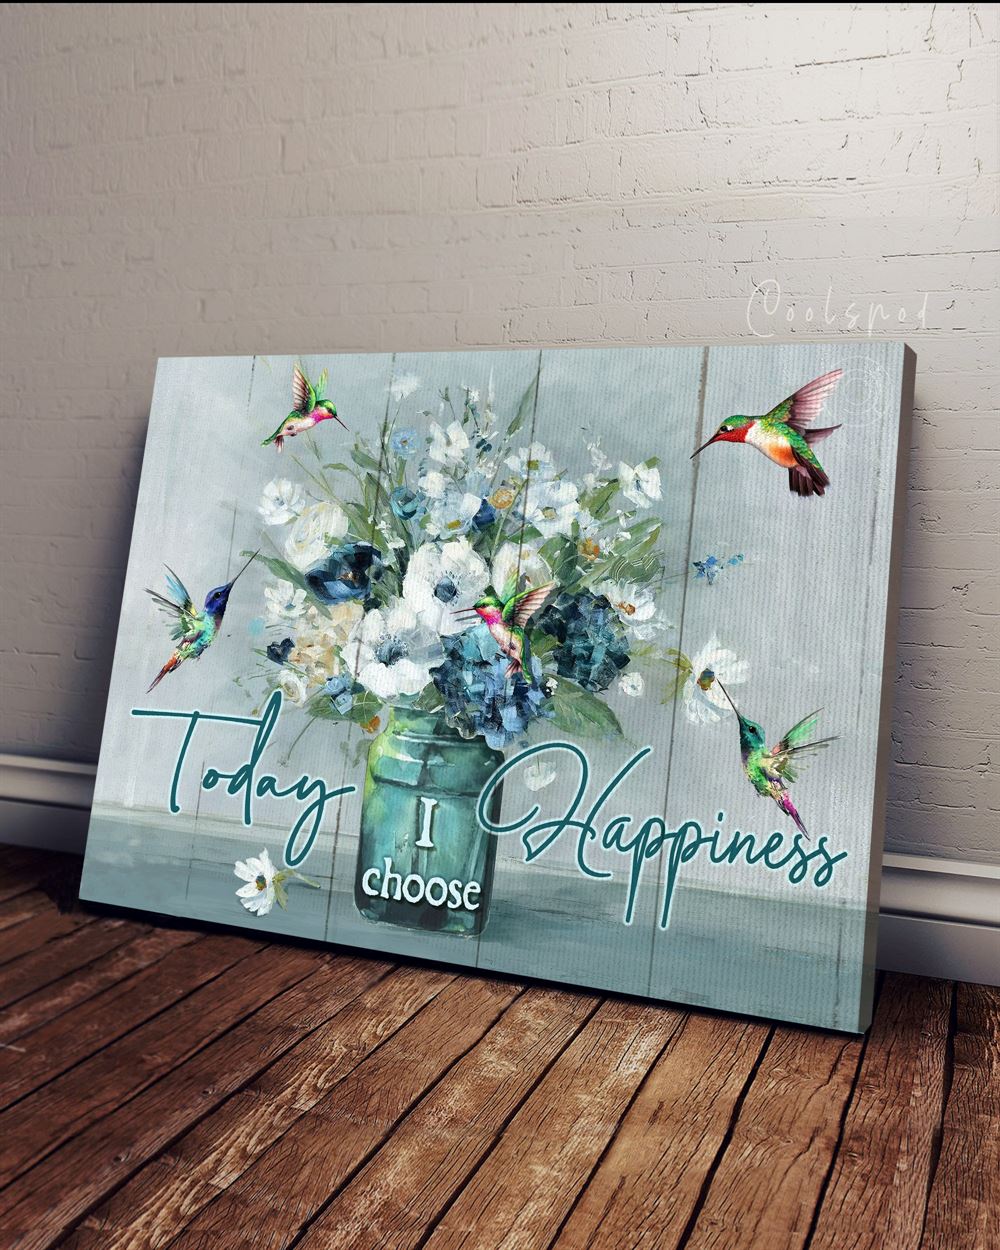 Canvas - Hippie - Today I Choose Happiness - Hummingbirds Flowers